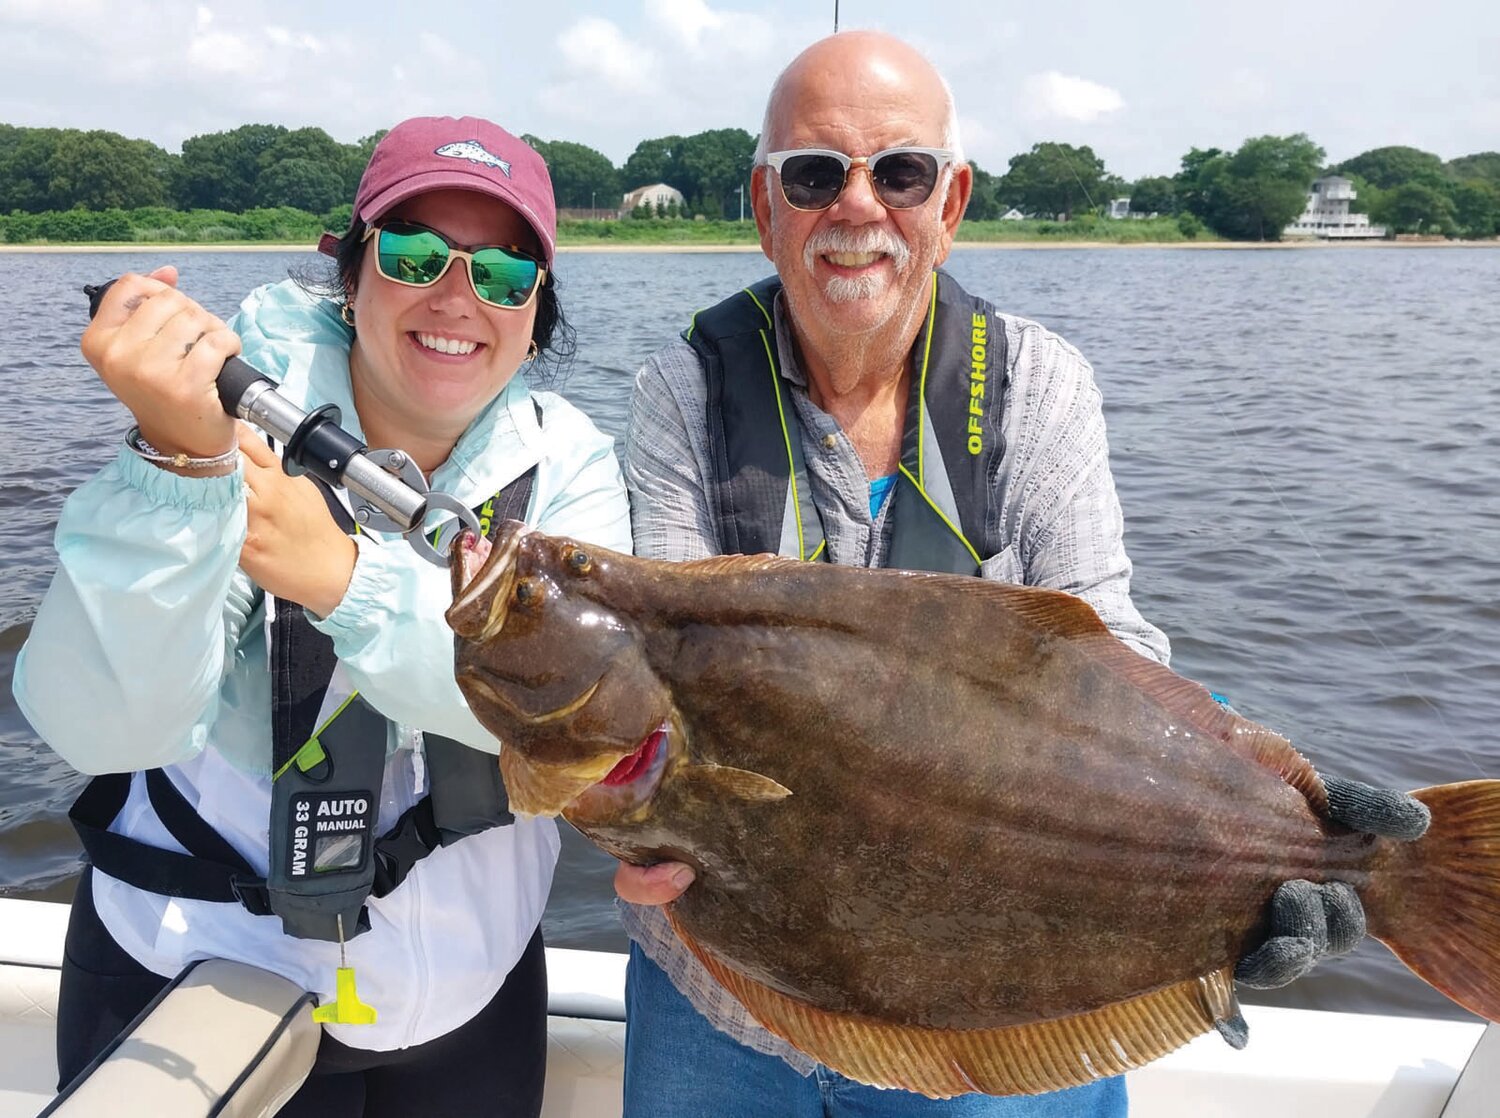 FAMILY FISHING: Shaina Boyle and her father Gary Vandemoortele both of Smithfield, RI with the 27-inch summer flounder Shaina caught fishing the Newport Bridge area last week. (Submitted photo)